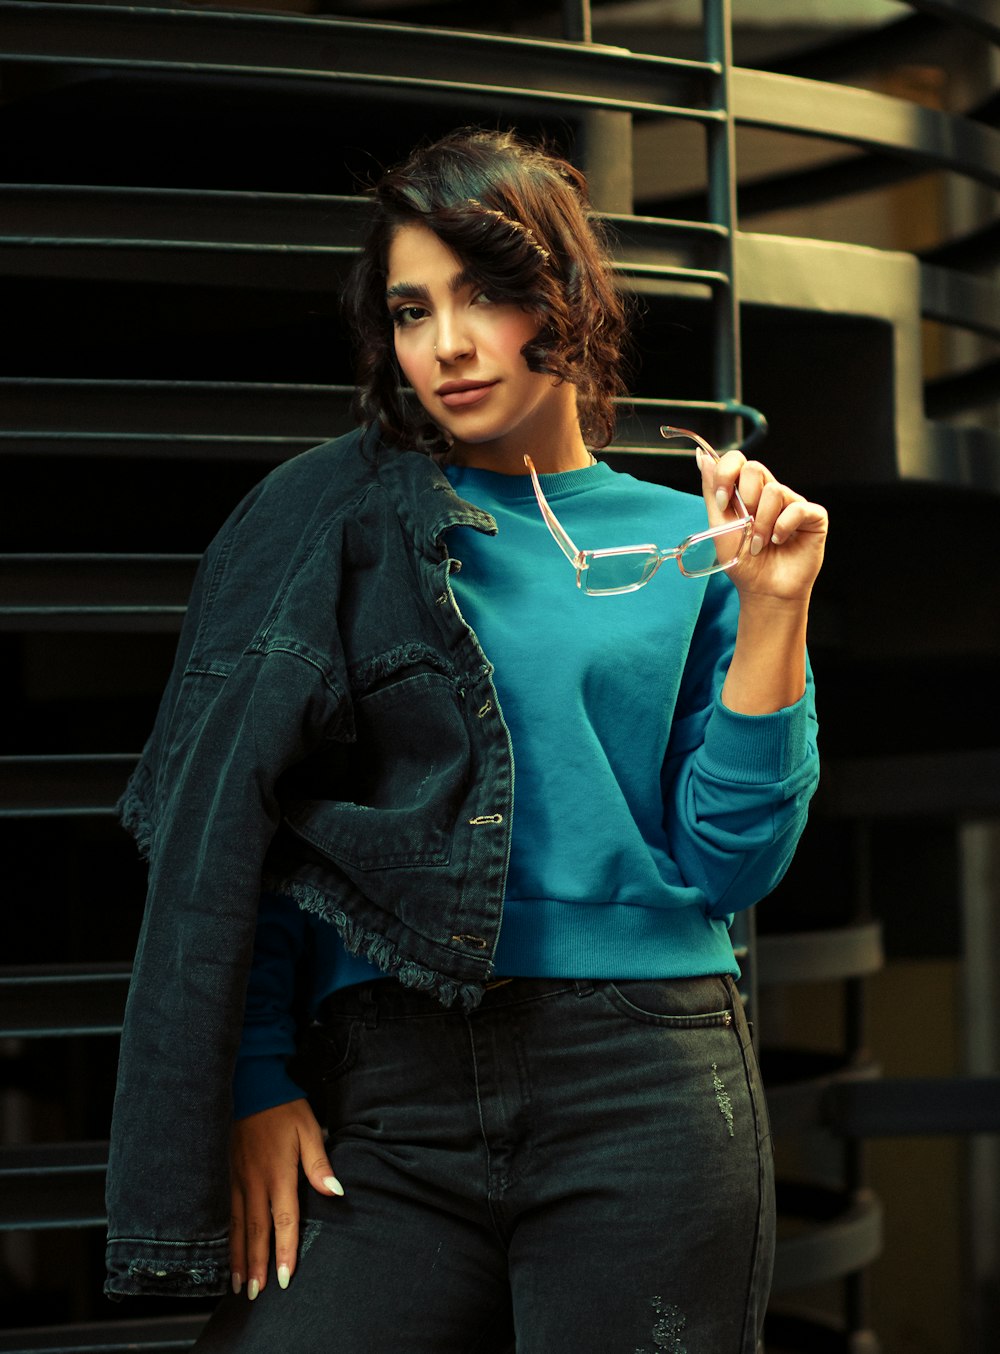 a woman in a blue shirt and jean jacket smoking a cigarette